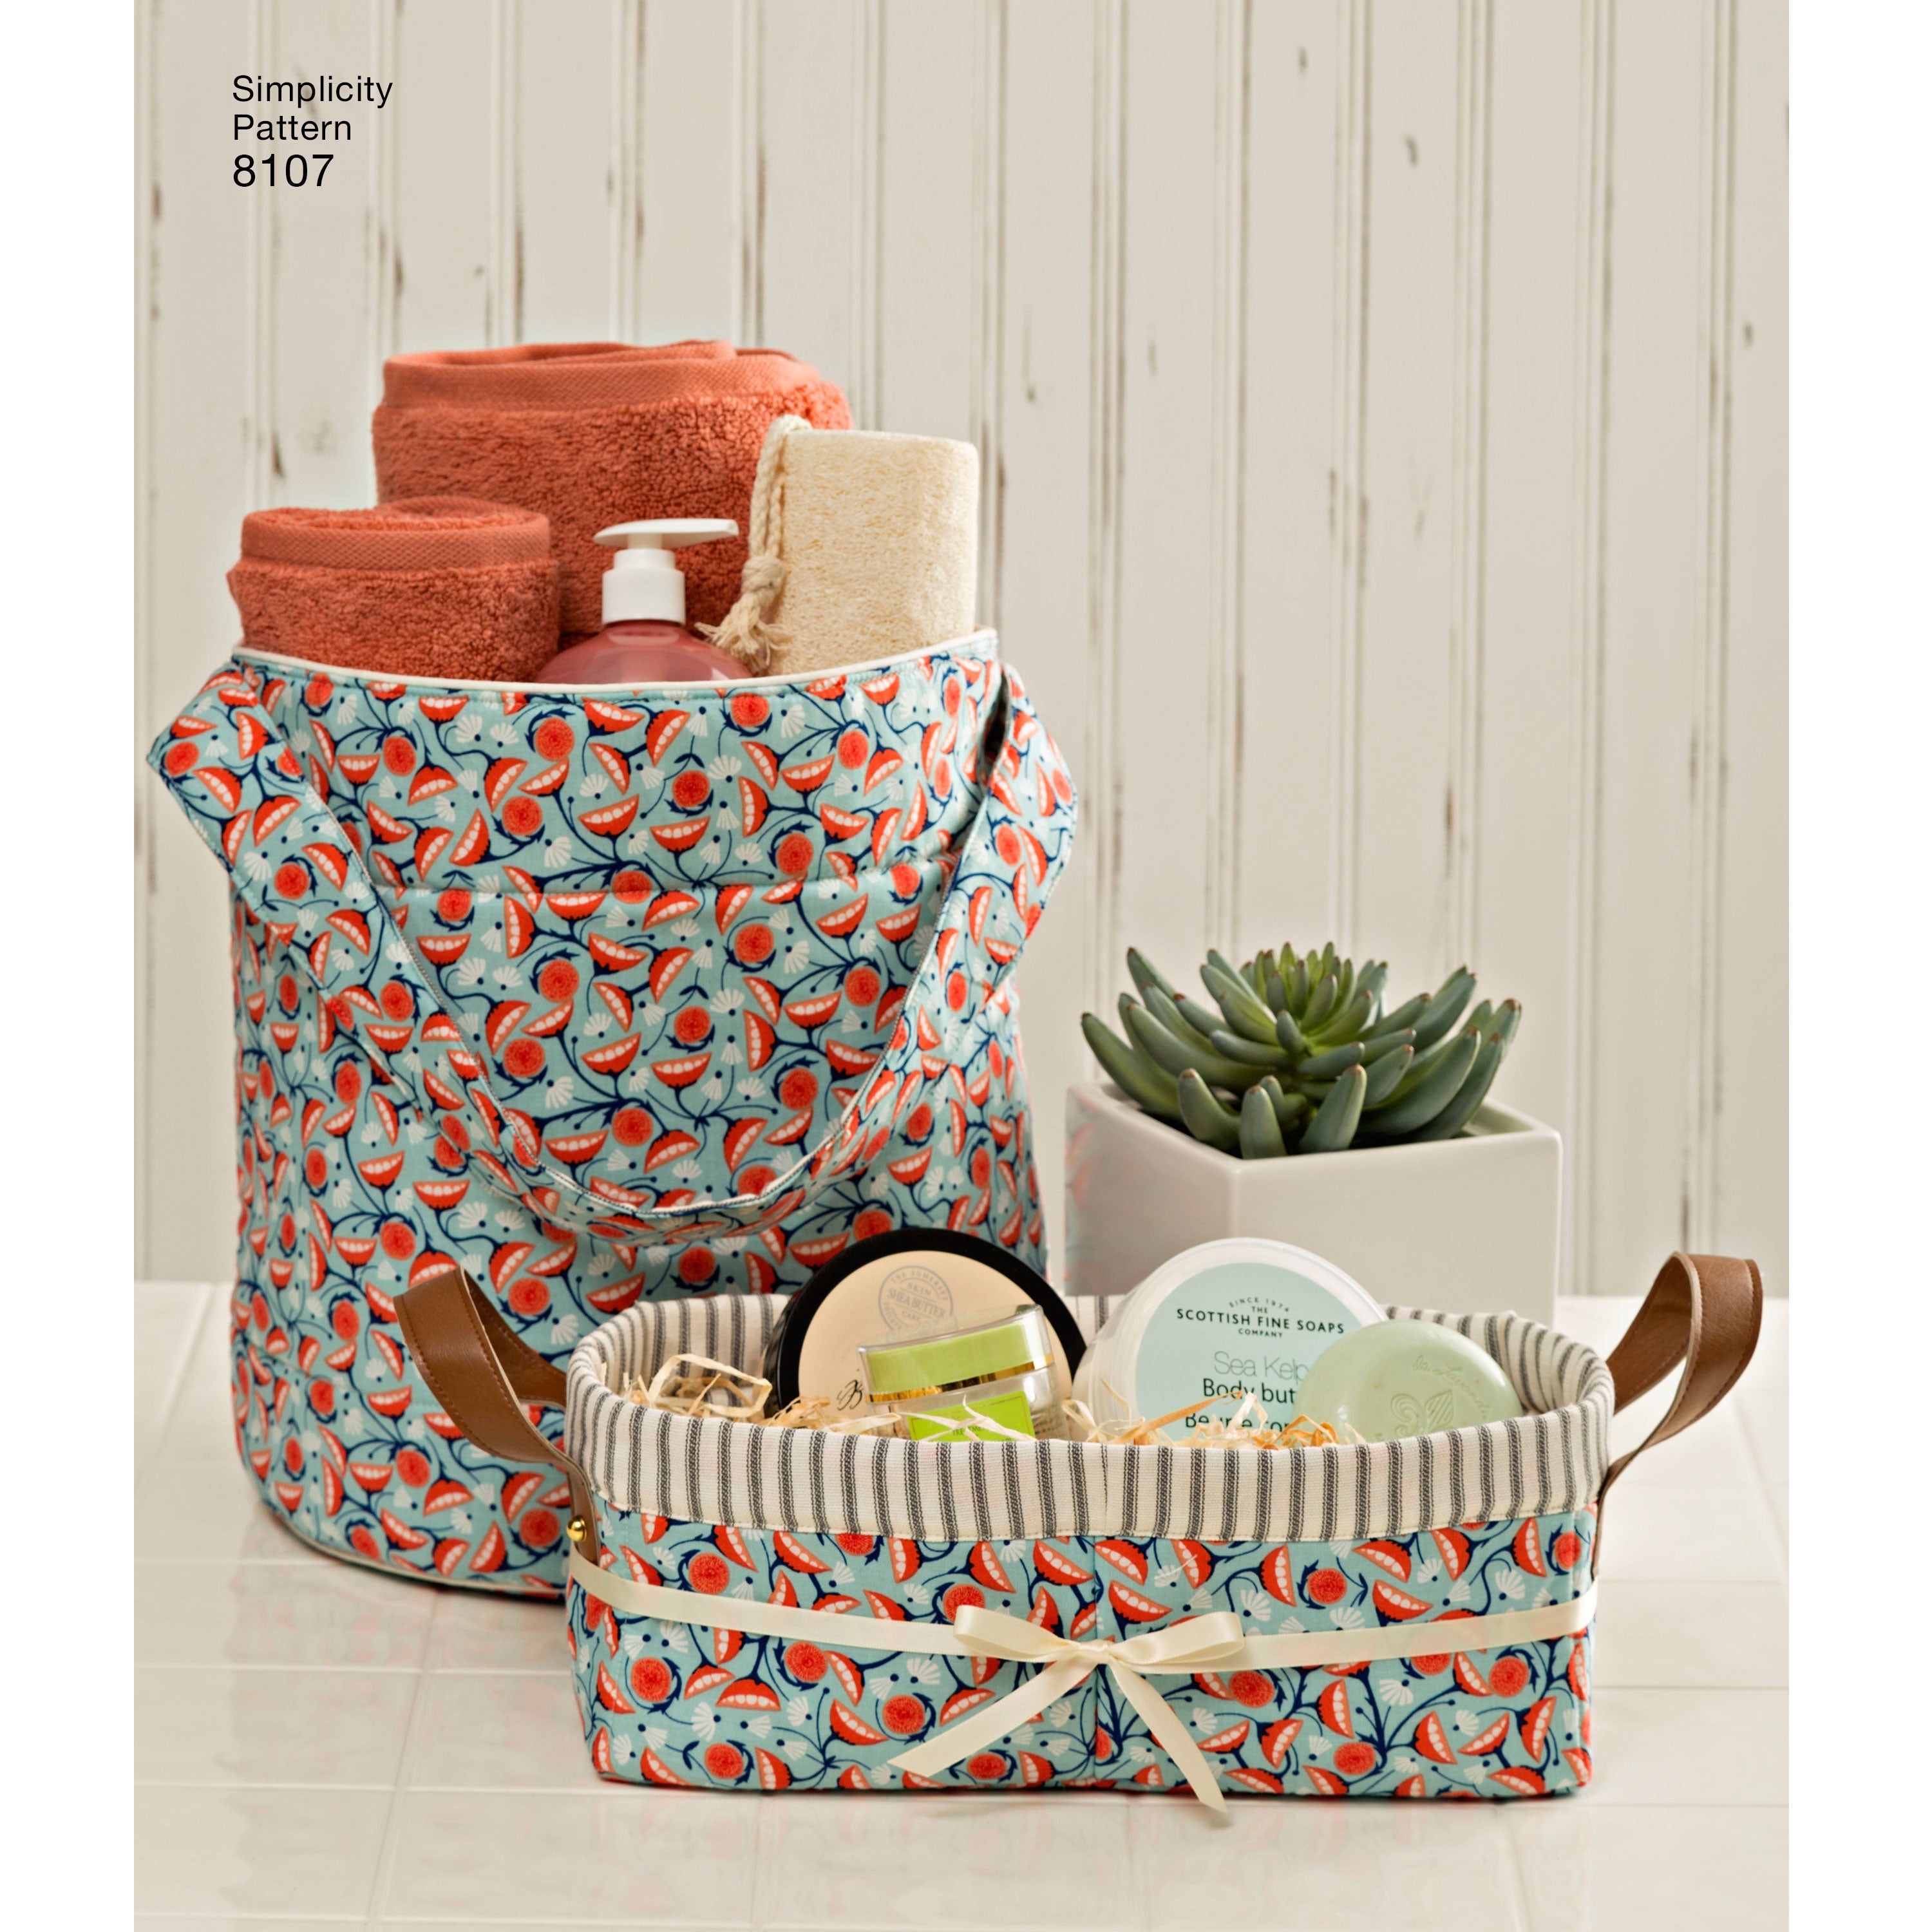 Simplicity Pattern 8107  Fabric buckets, baskets and totes from Jaycotts Sewing Supplies